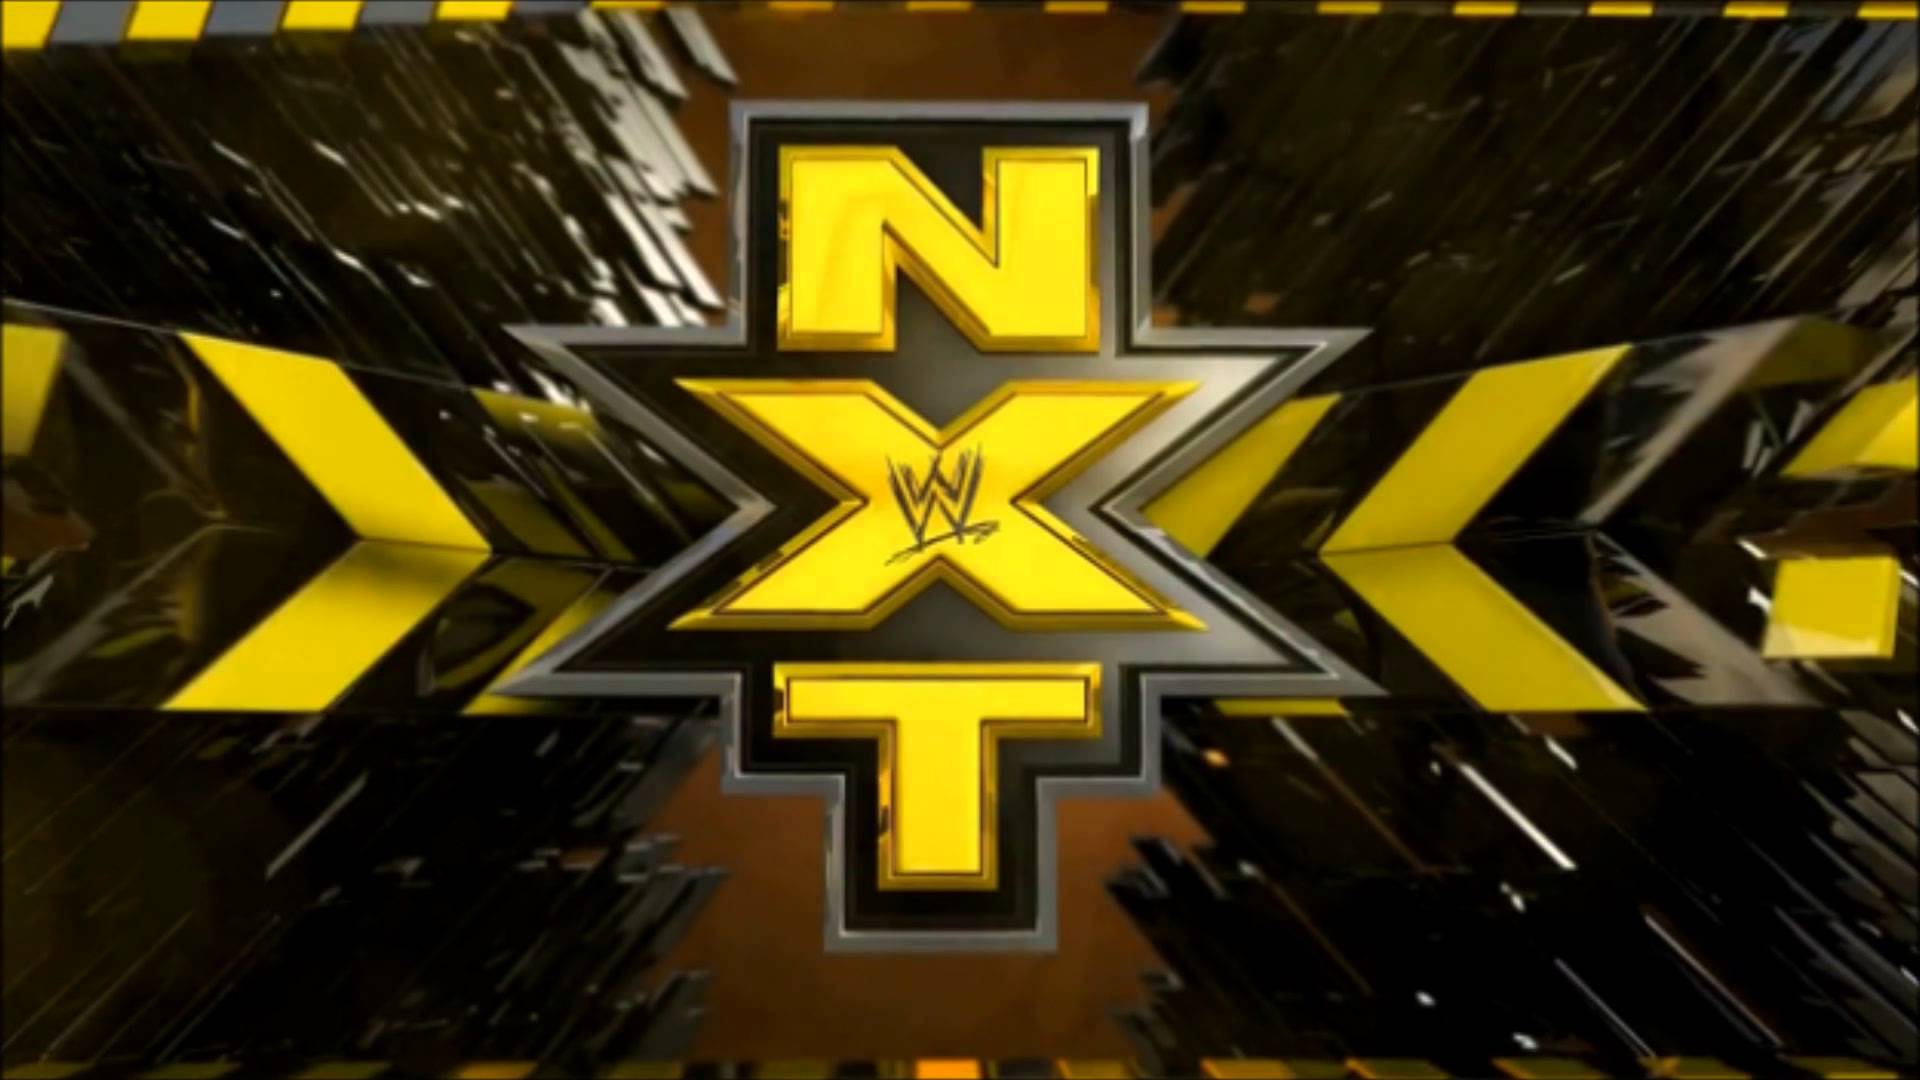 WWE NXT Wallpapers - Wallpaper Cave